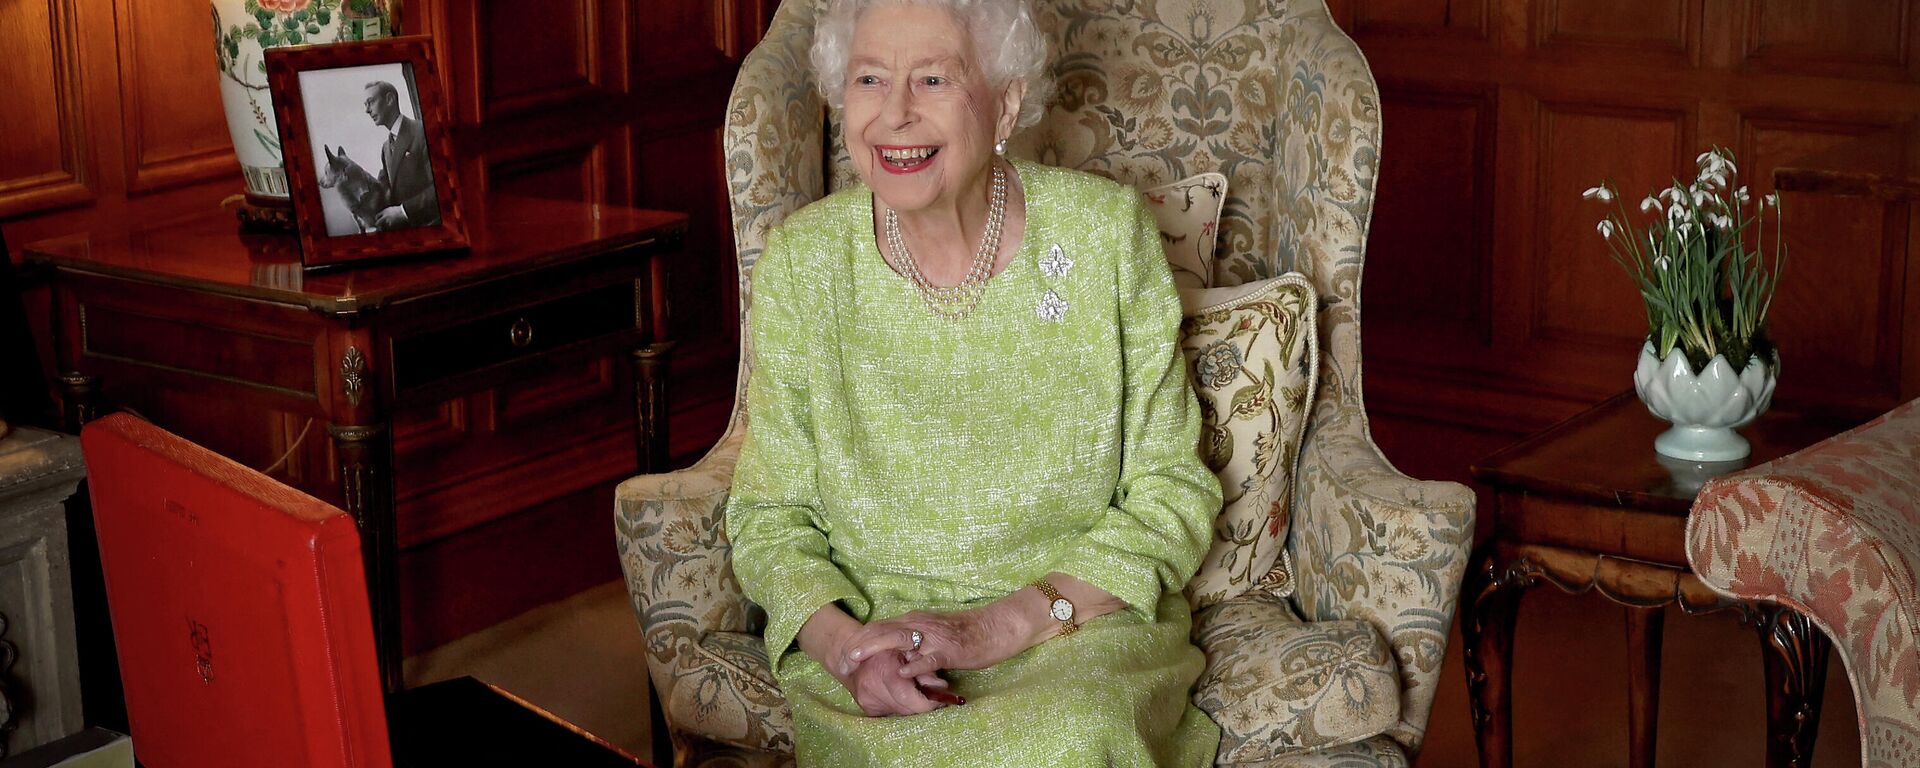 A file Buckingham Palace handout image released on February 6, 2022, shows Britain's Queen Elizabeth II smiling as she sits in Sandringham House in Norfolk, eastern England on February 2, 2022 - Sputnik International, 1920, 17.04.2022